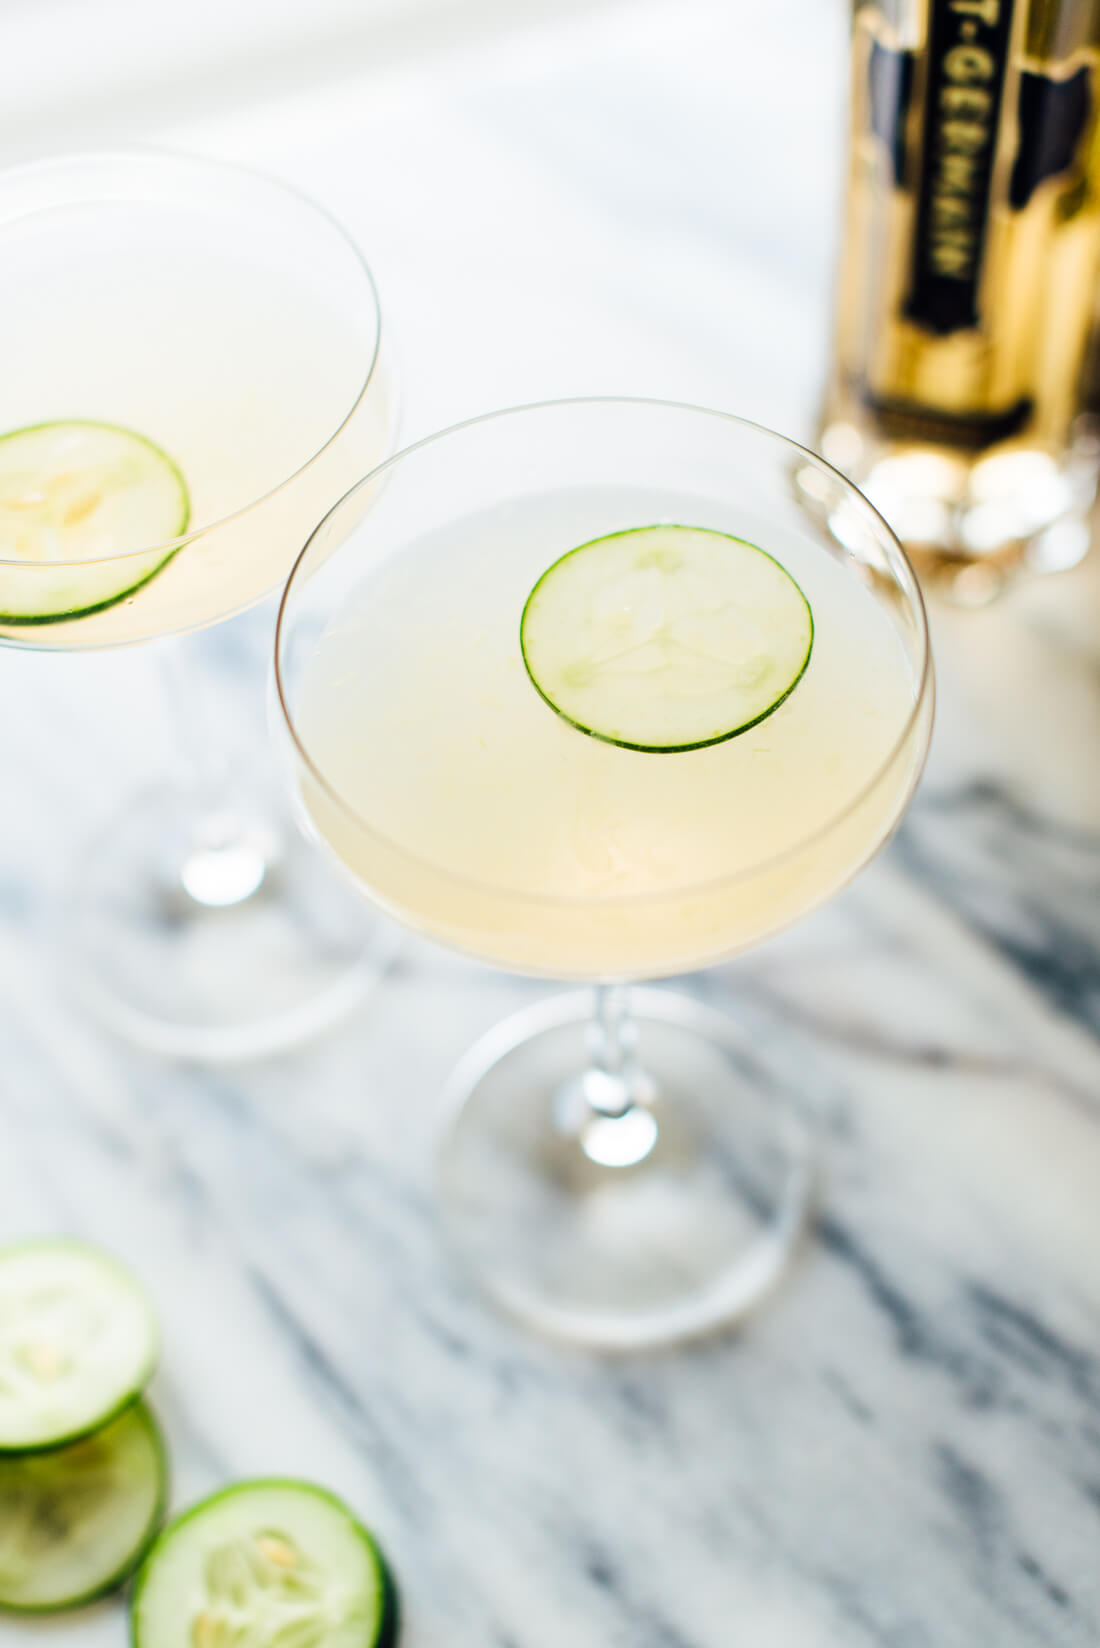 This refreshing cucumber elderflower gimlet recipe is made with Hendrick's gin, St. Germain liqueur, fresh cucumber and lime!